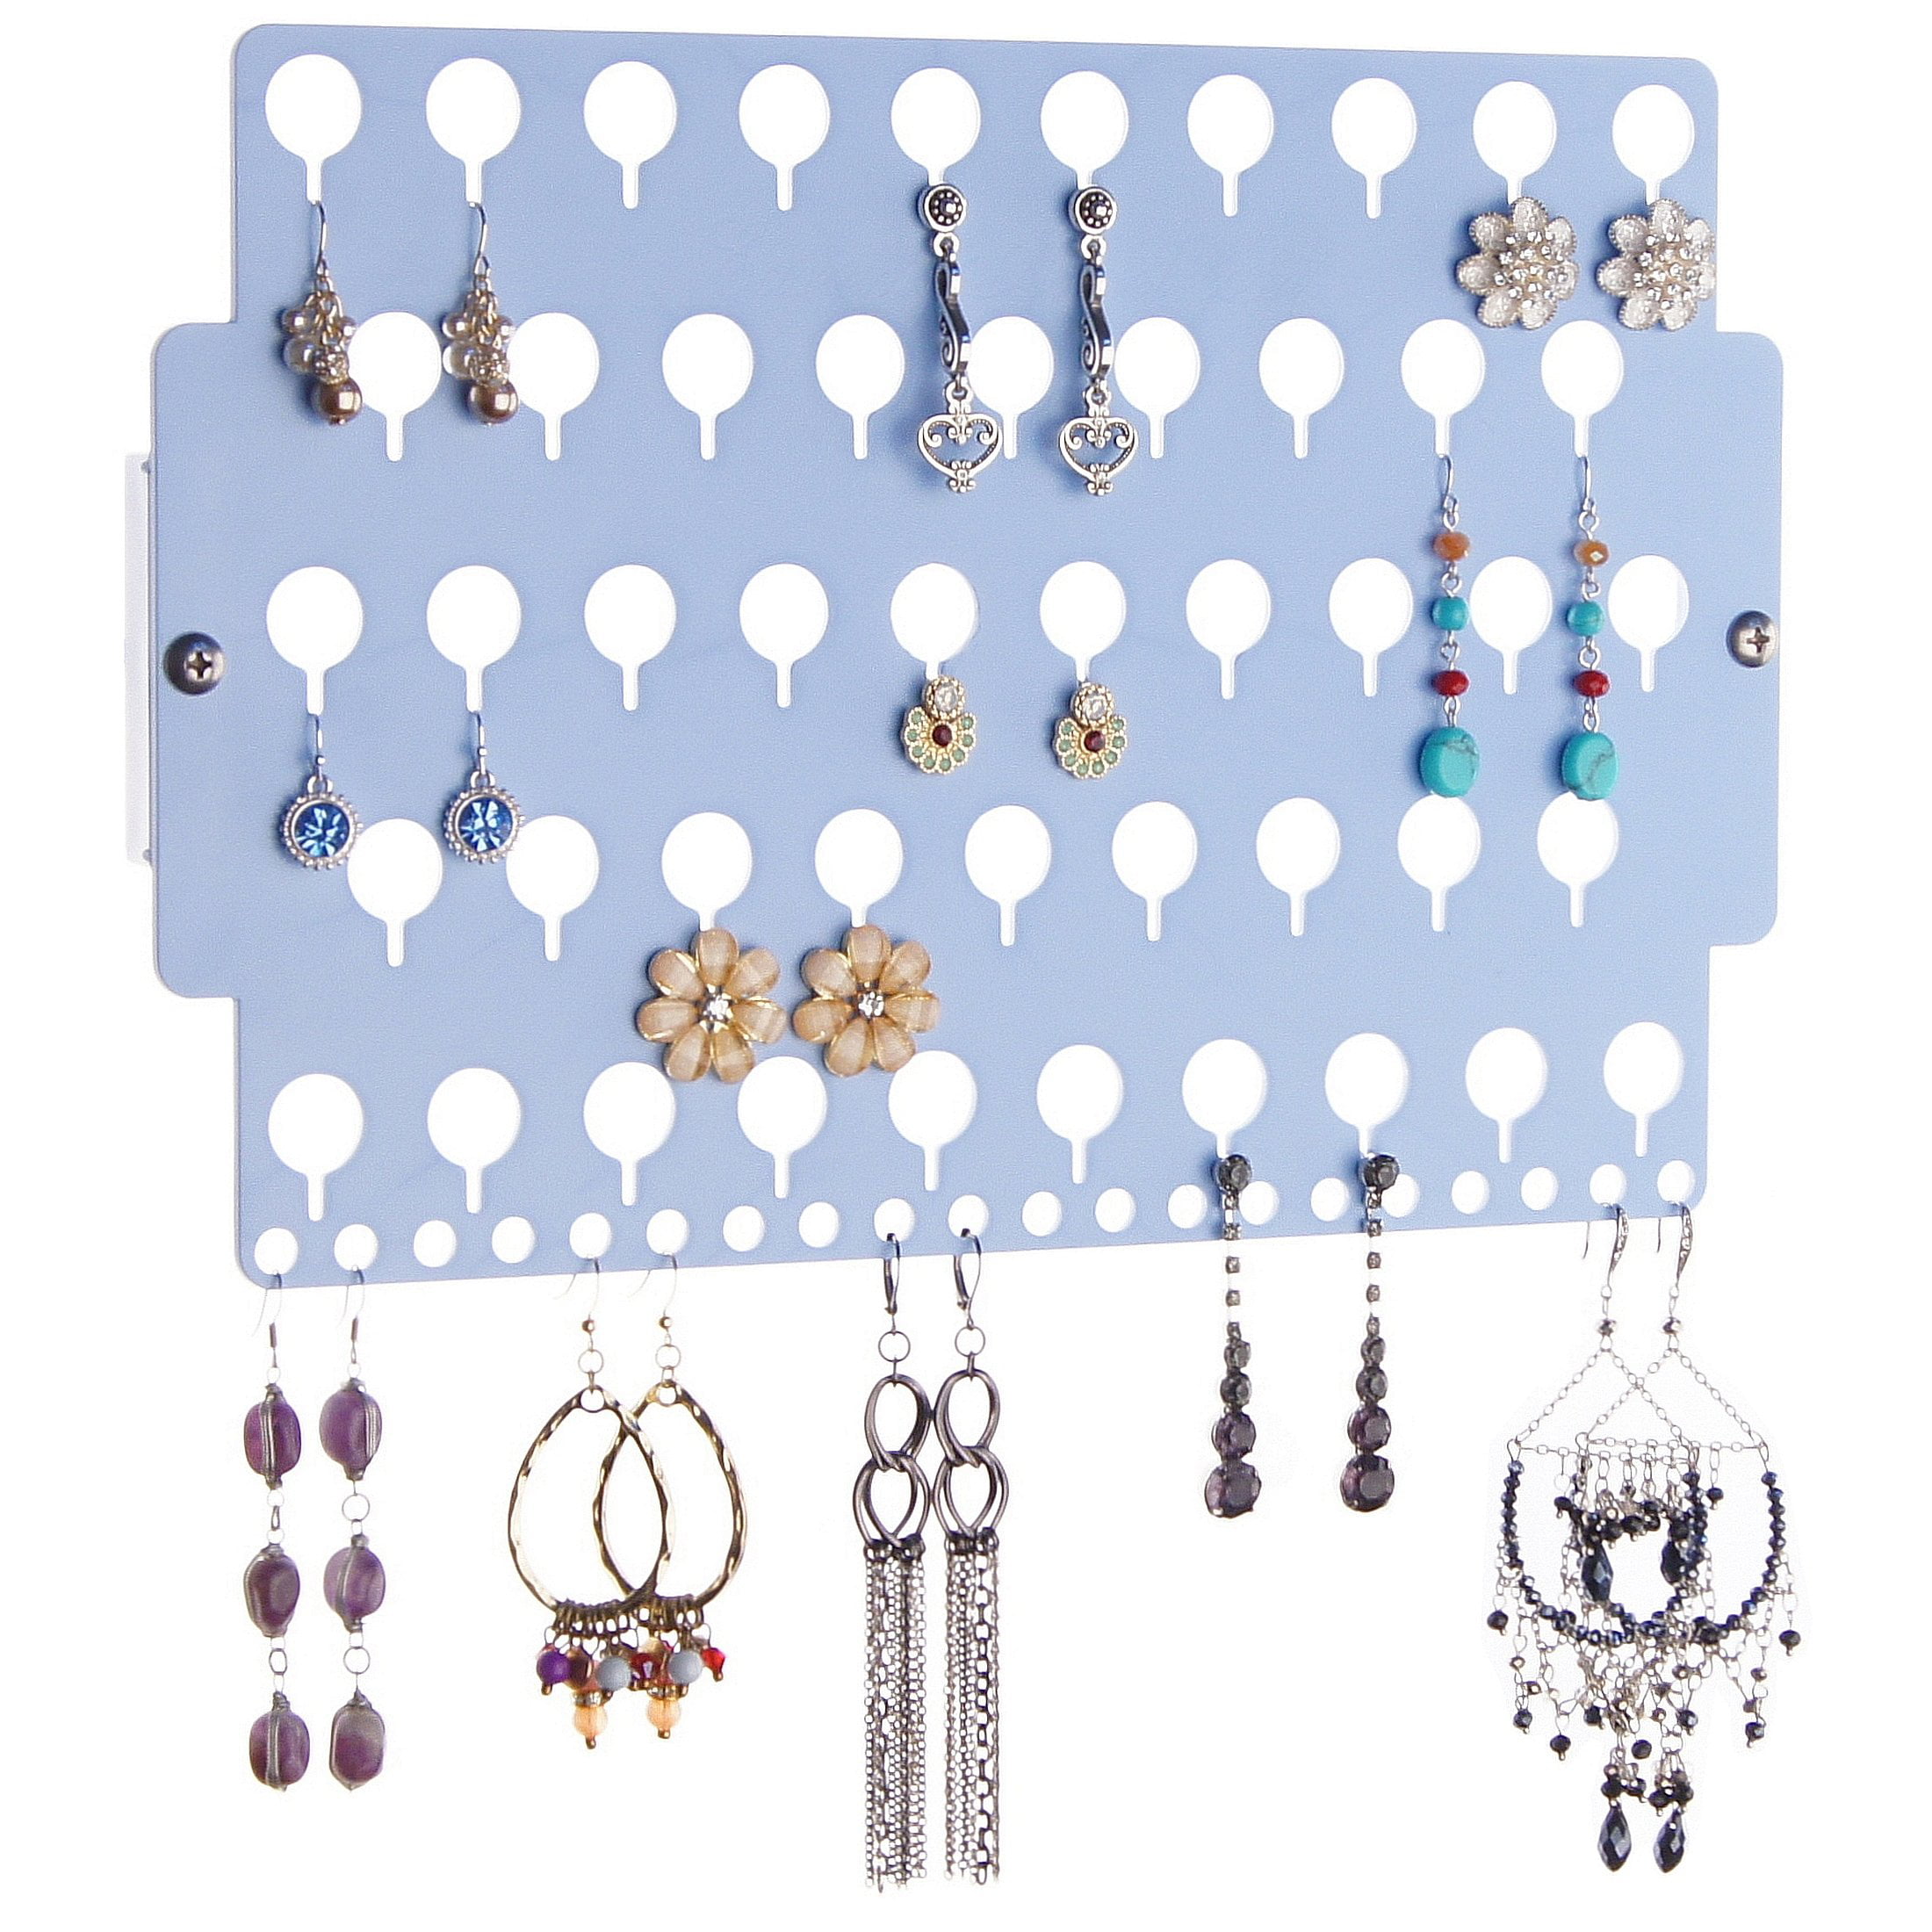 100x Jewelry earring ear studs hanging display holder hang cards organizer BE 